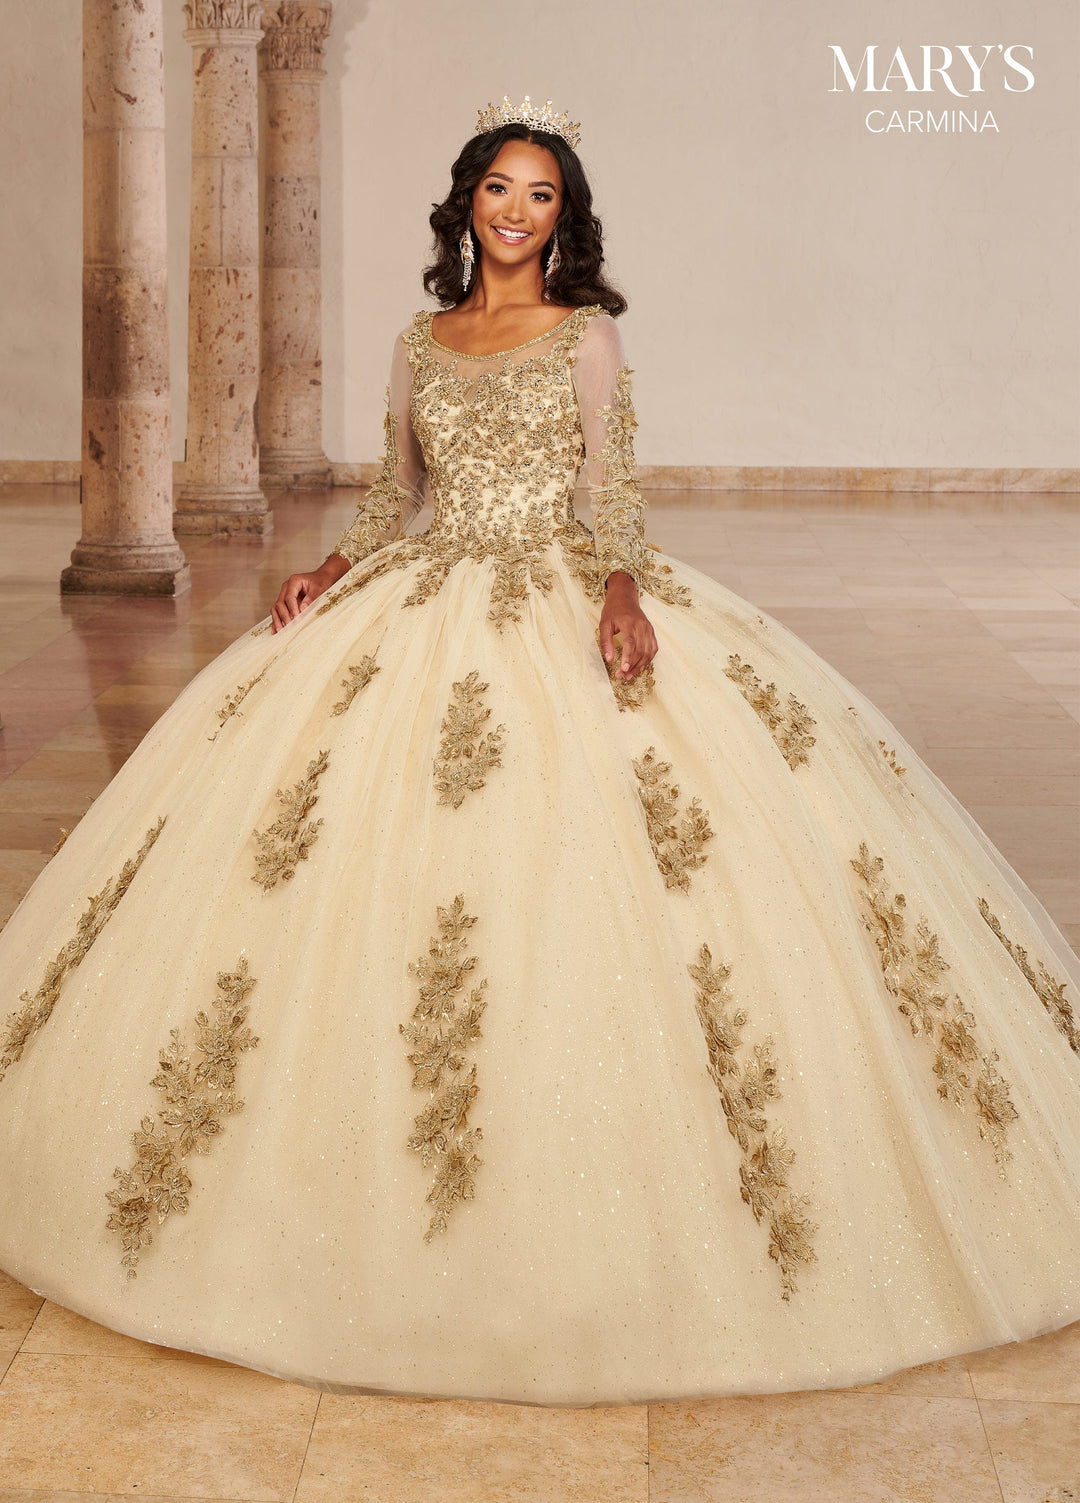 3/4 Sleeve Quinceanera Dress by Mary's Bridal MQ1093